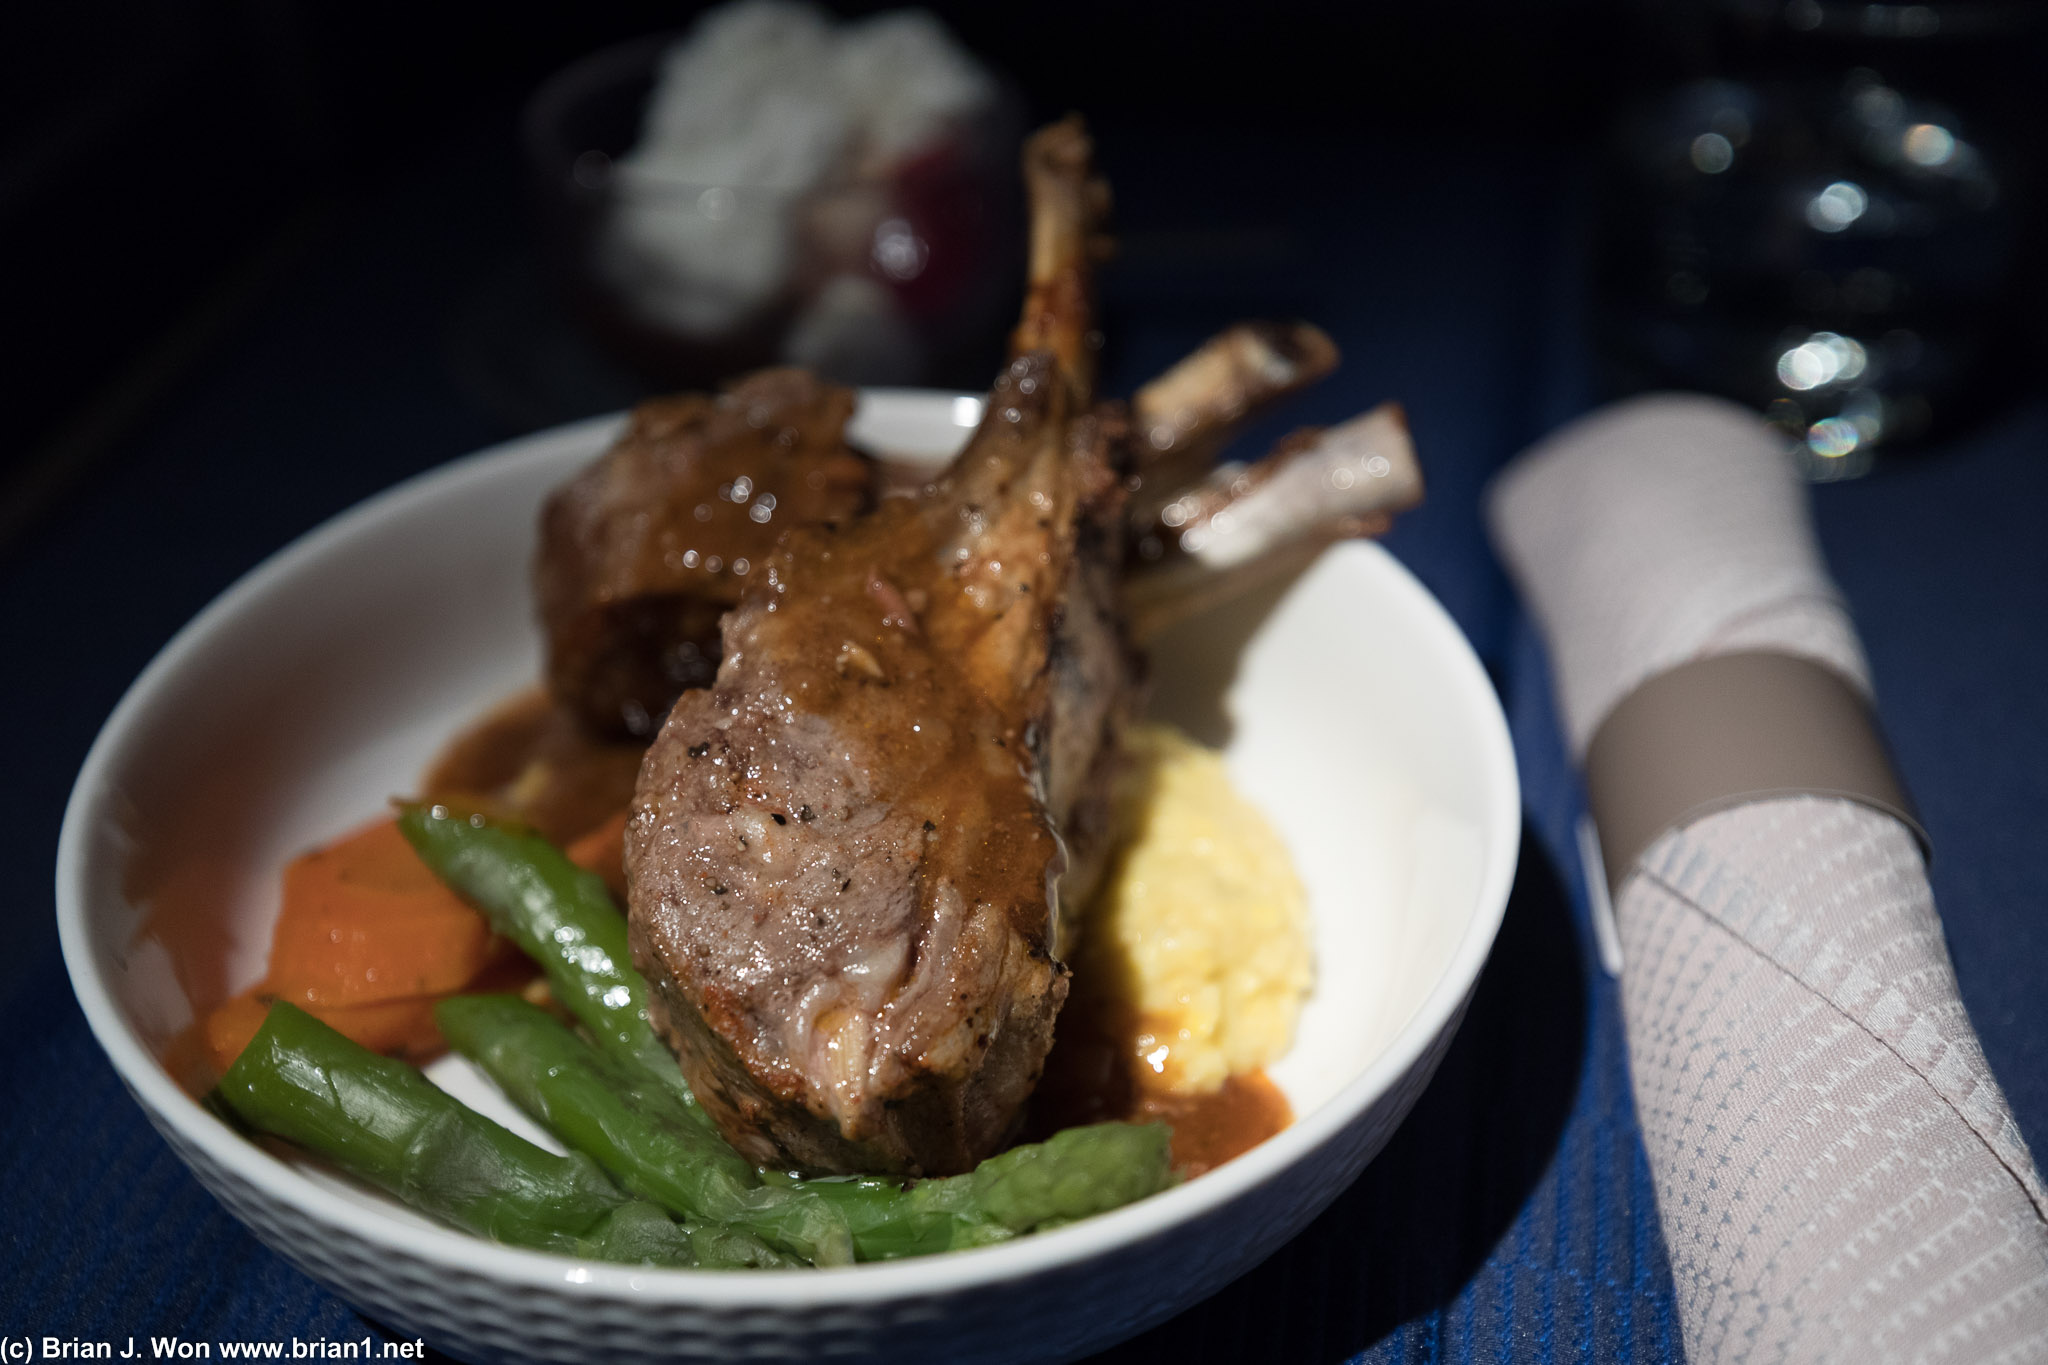 Lamb chops. Pretty good for airplane food. Note "for airplane food."